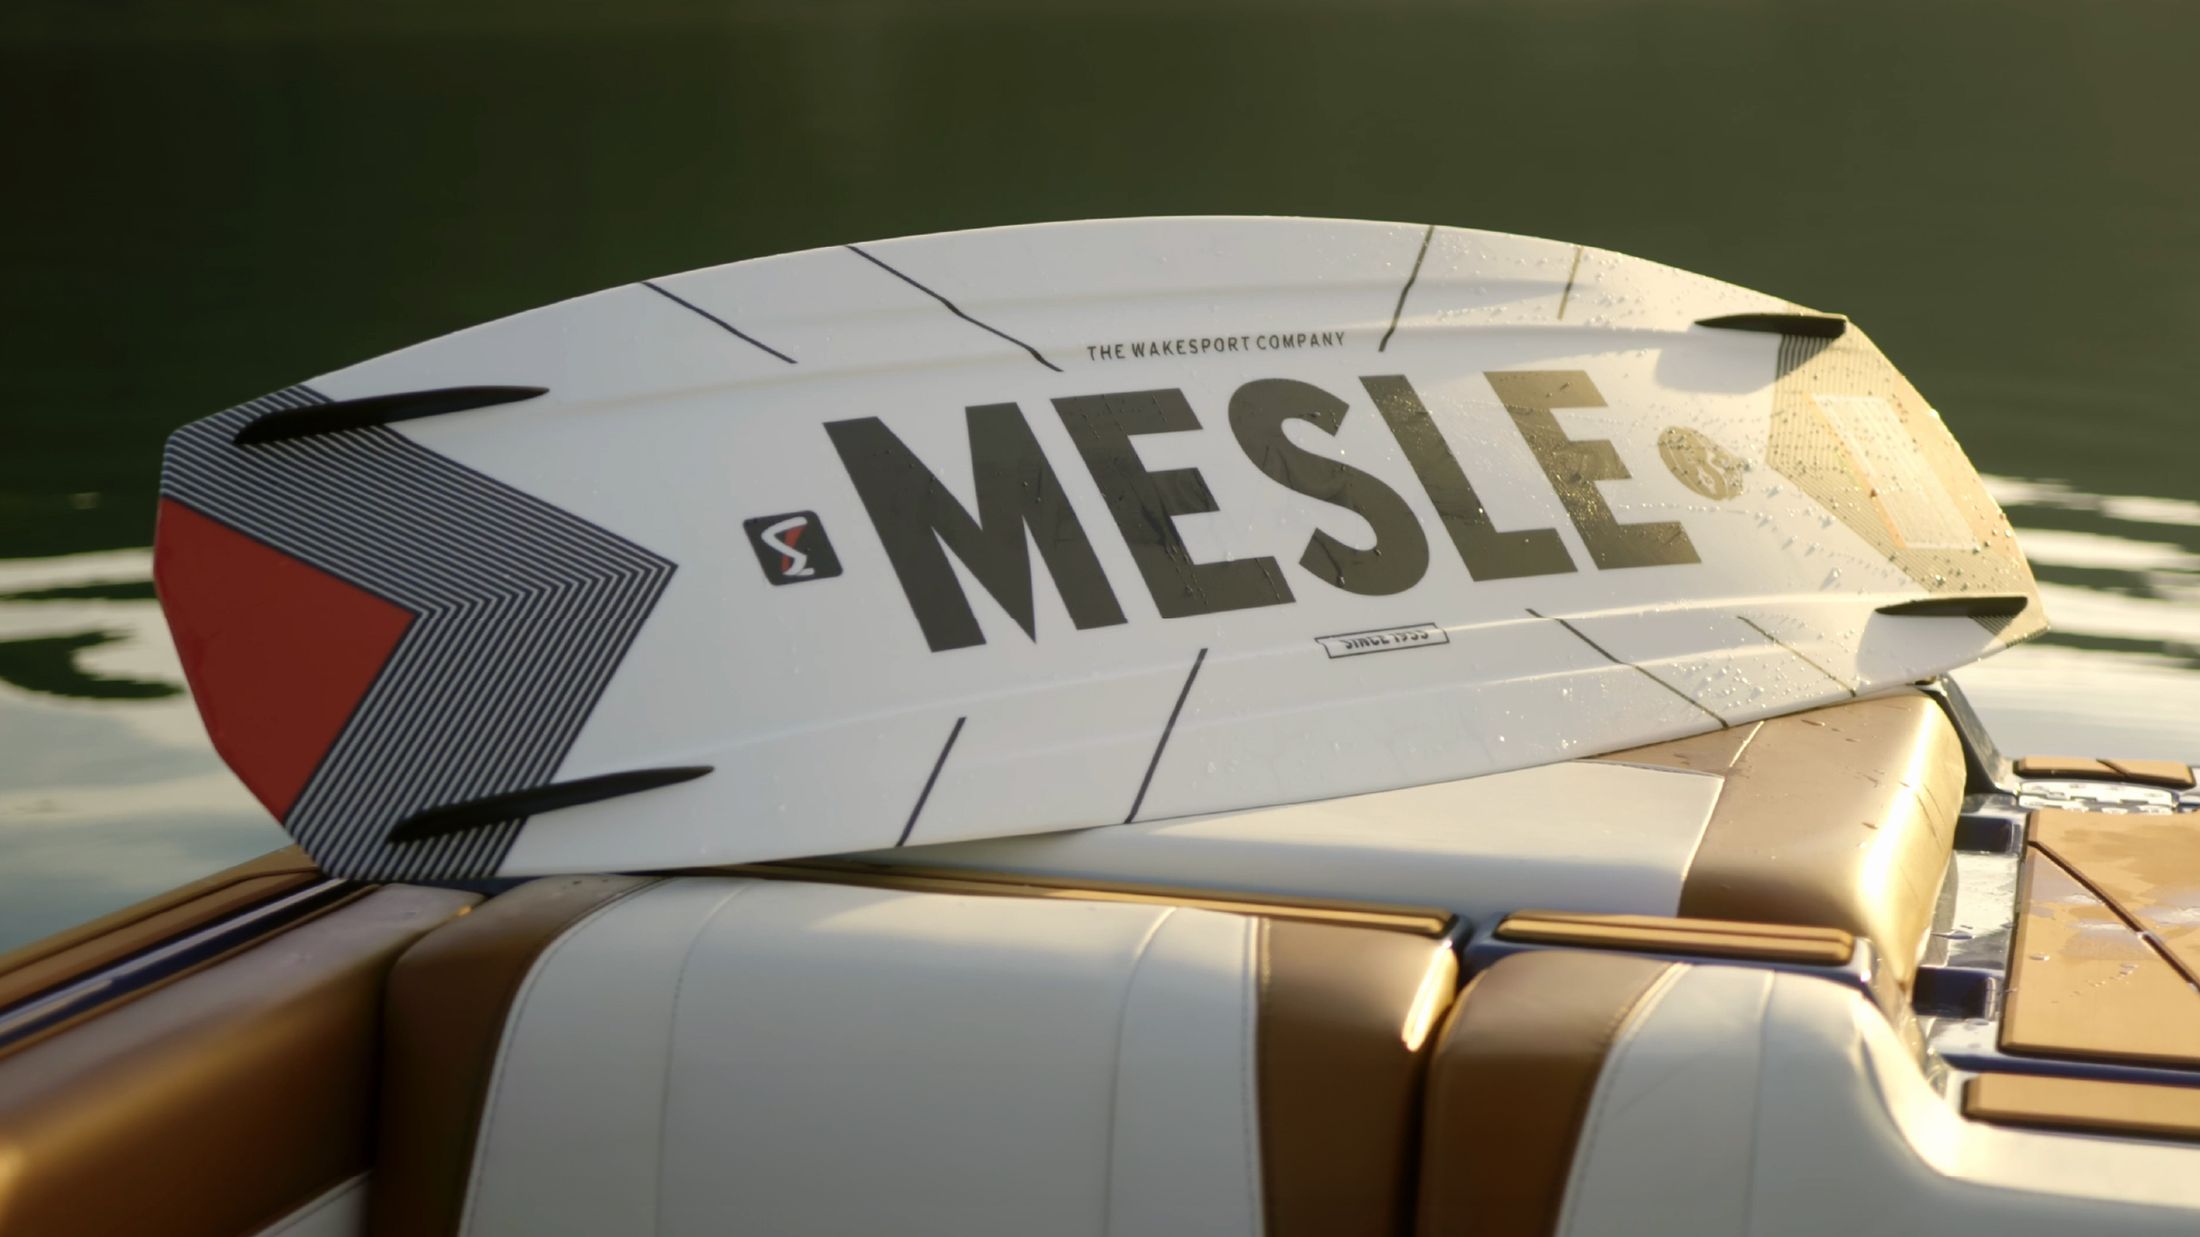 MESLE Wakeboard Set Pilot 138cm in red with Maxx binding, professional wakeboard for boat & cableway, video thumbnail